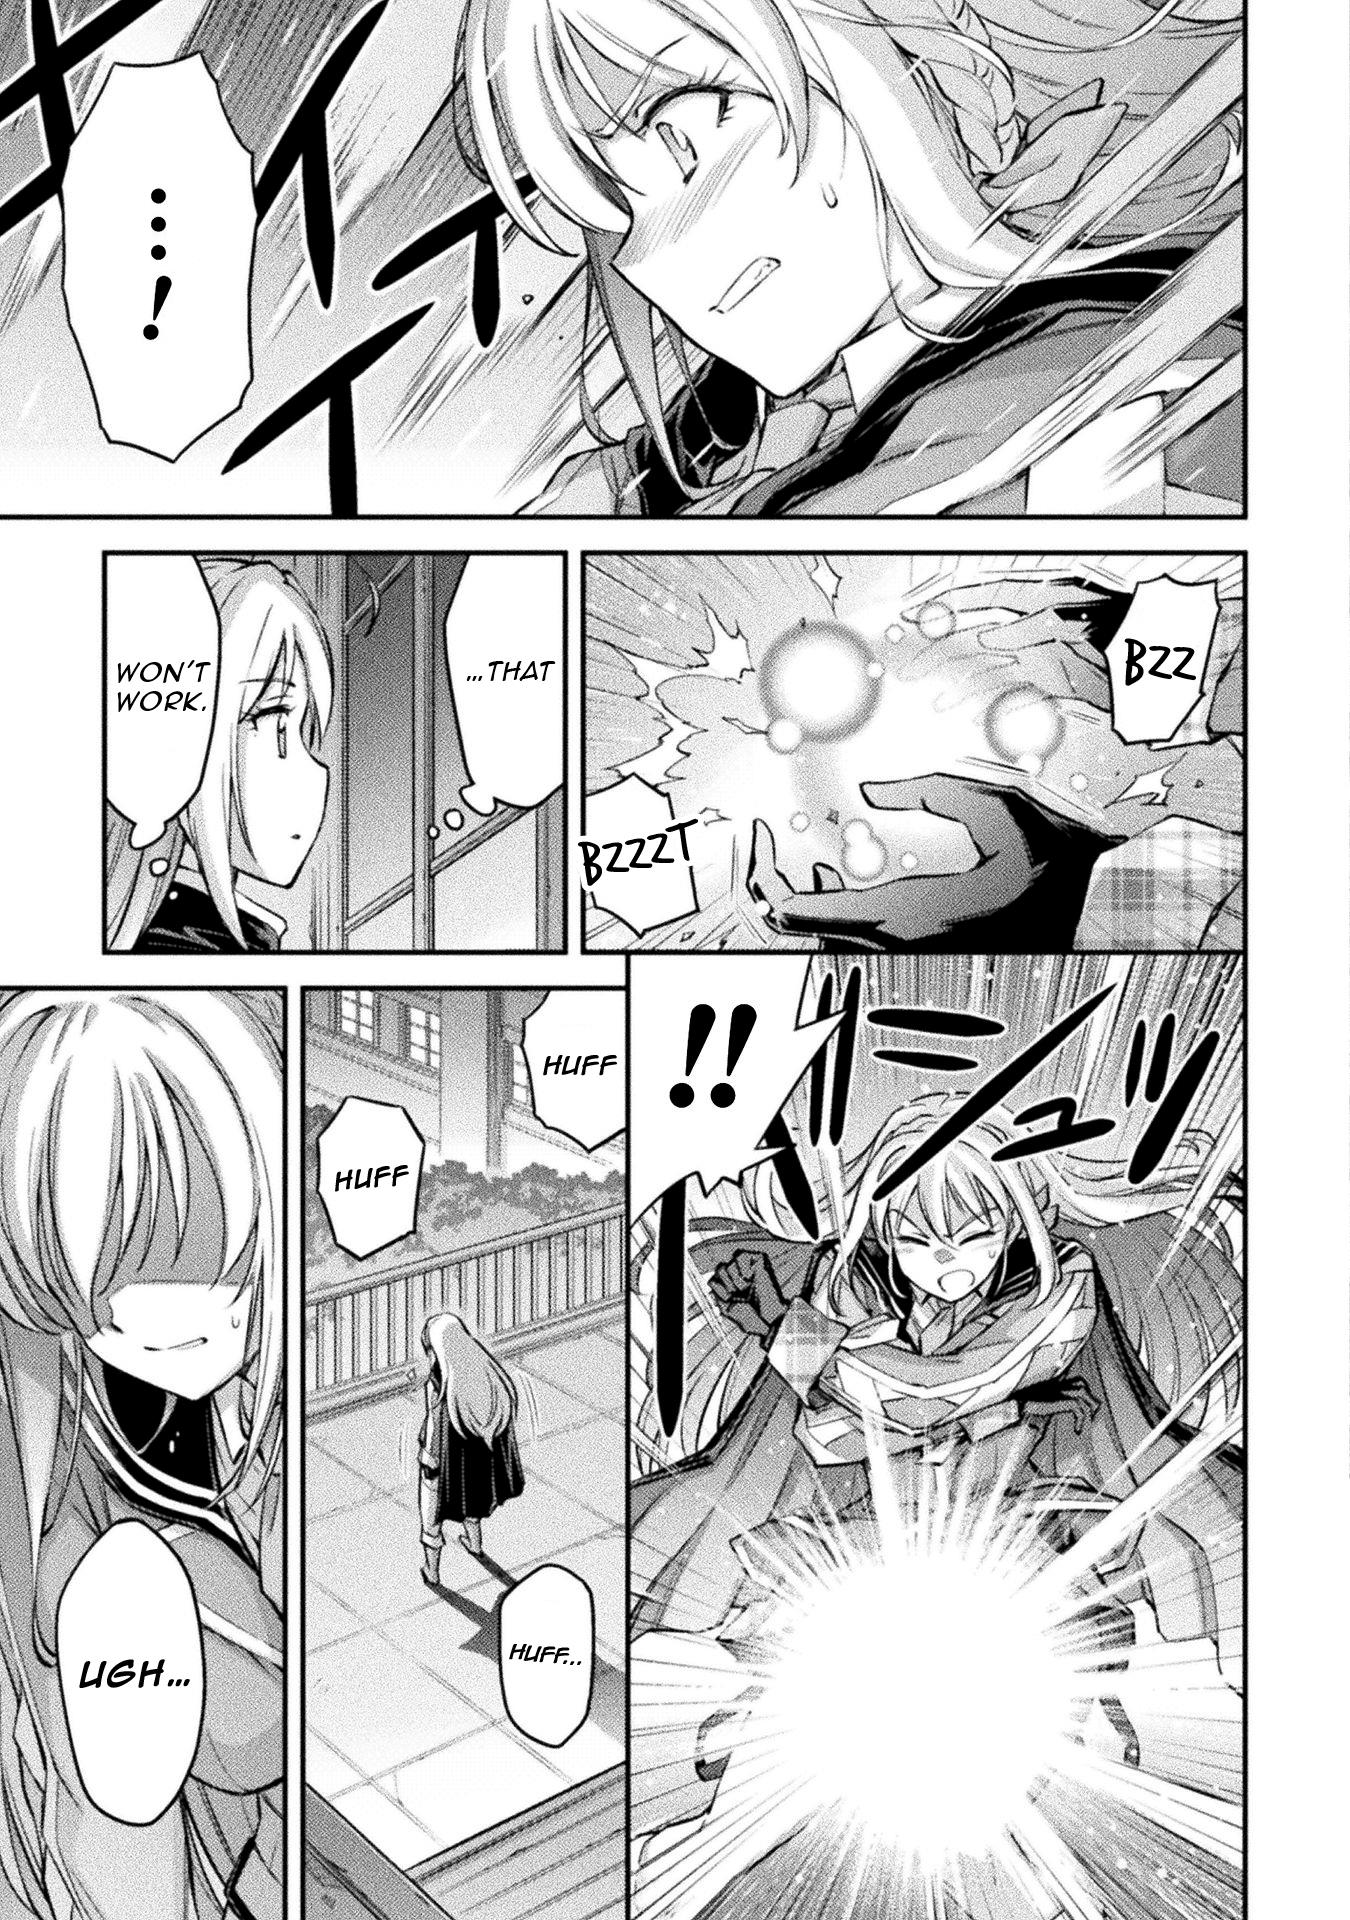 School Life Of A Mercenary Girl Vol.1 Chapter 5: Cierra Has Her Hair Washed - Picture 3